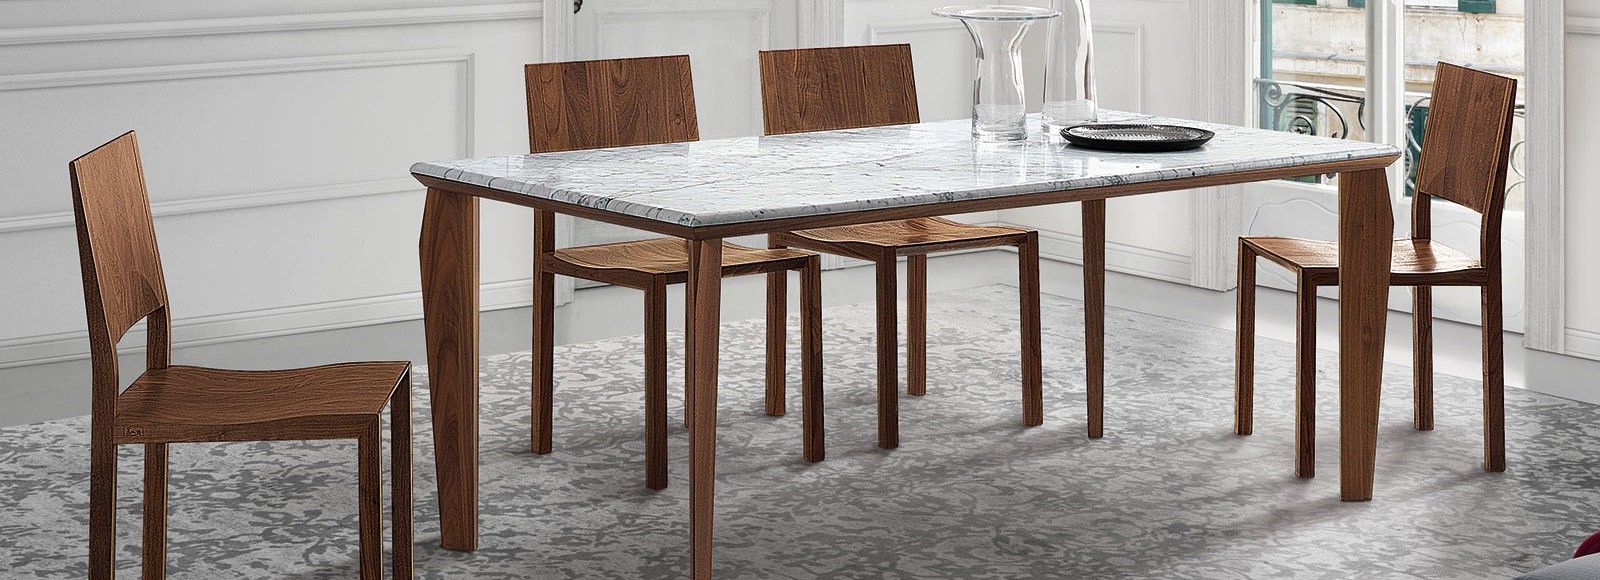 Popular 6 Seater Retangular Wood Contemporary Dining Tables Throughout Gioia Dining Table (View 3 of 30)